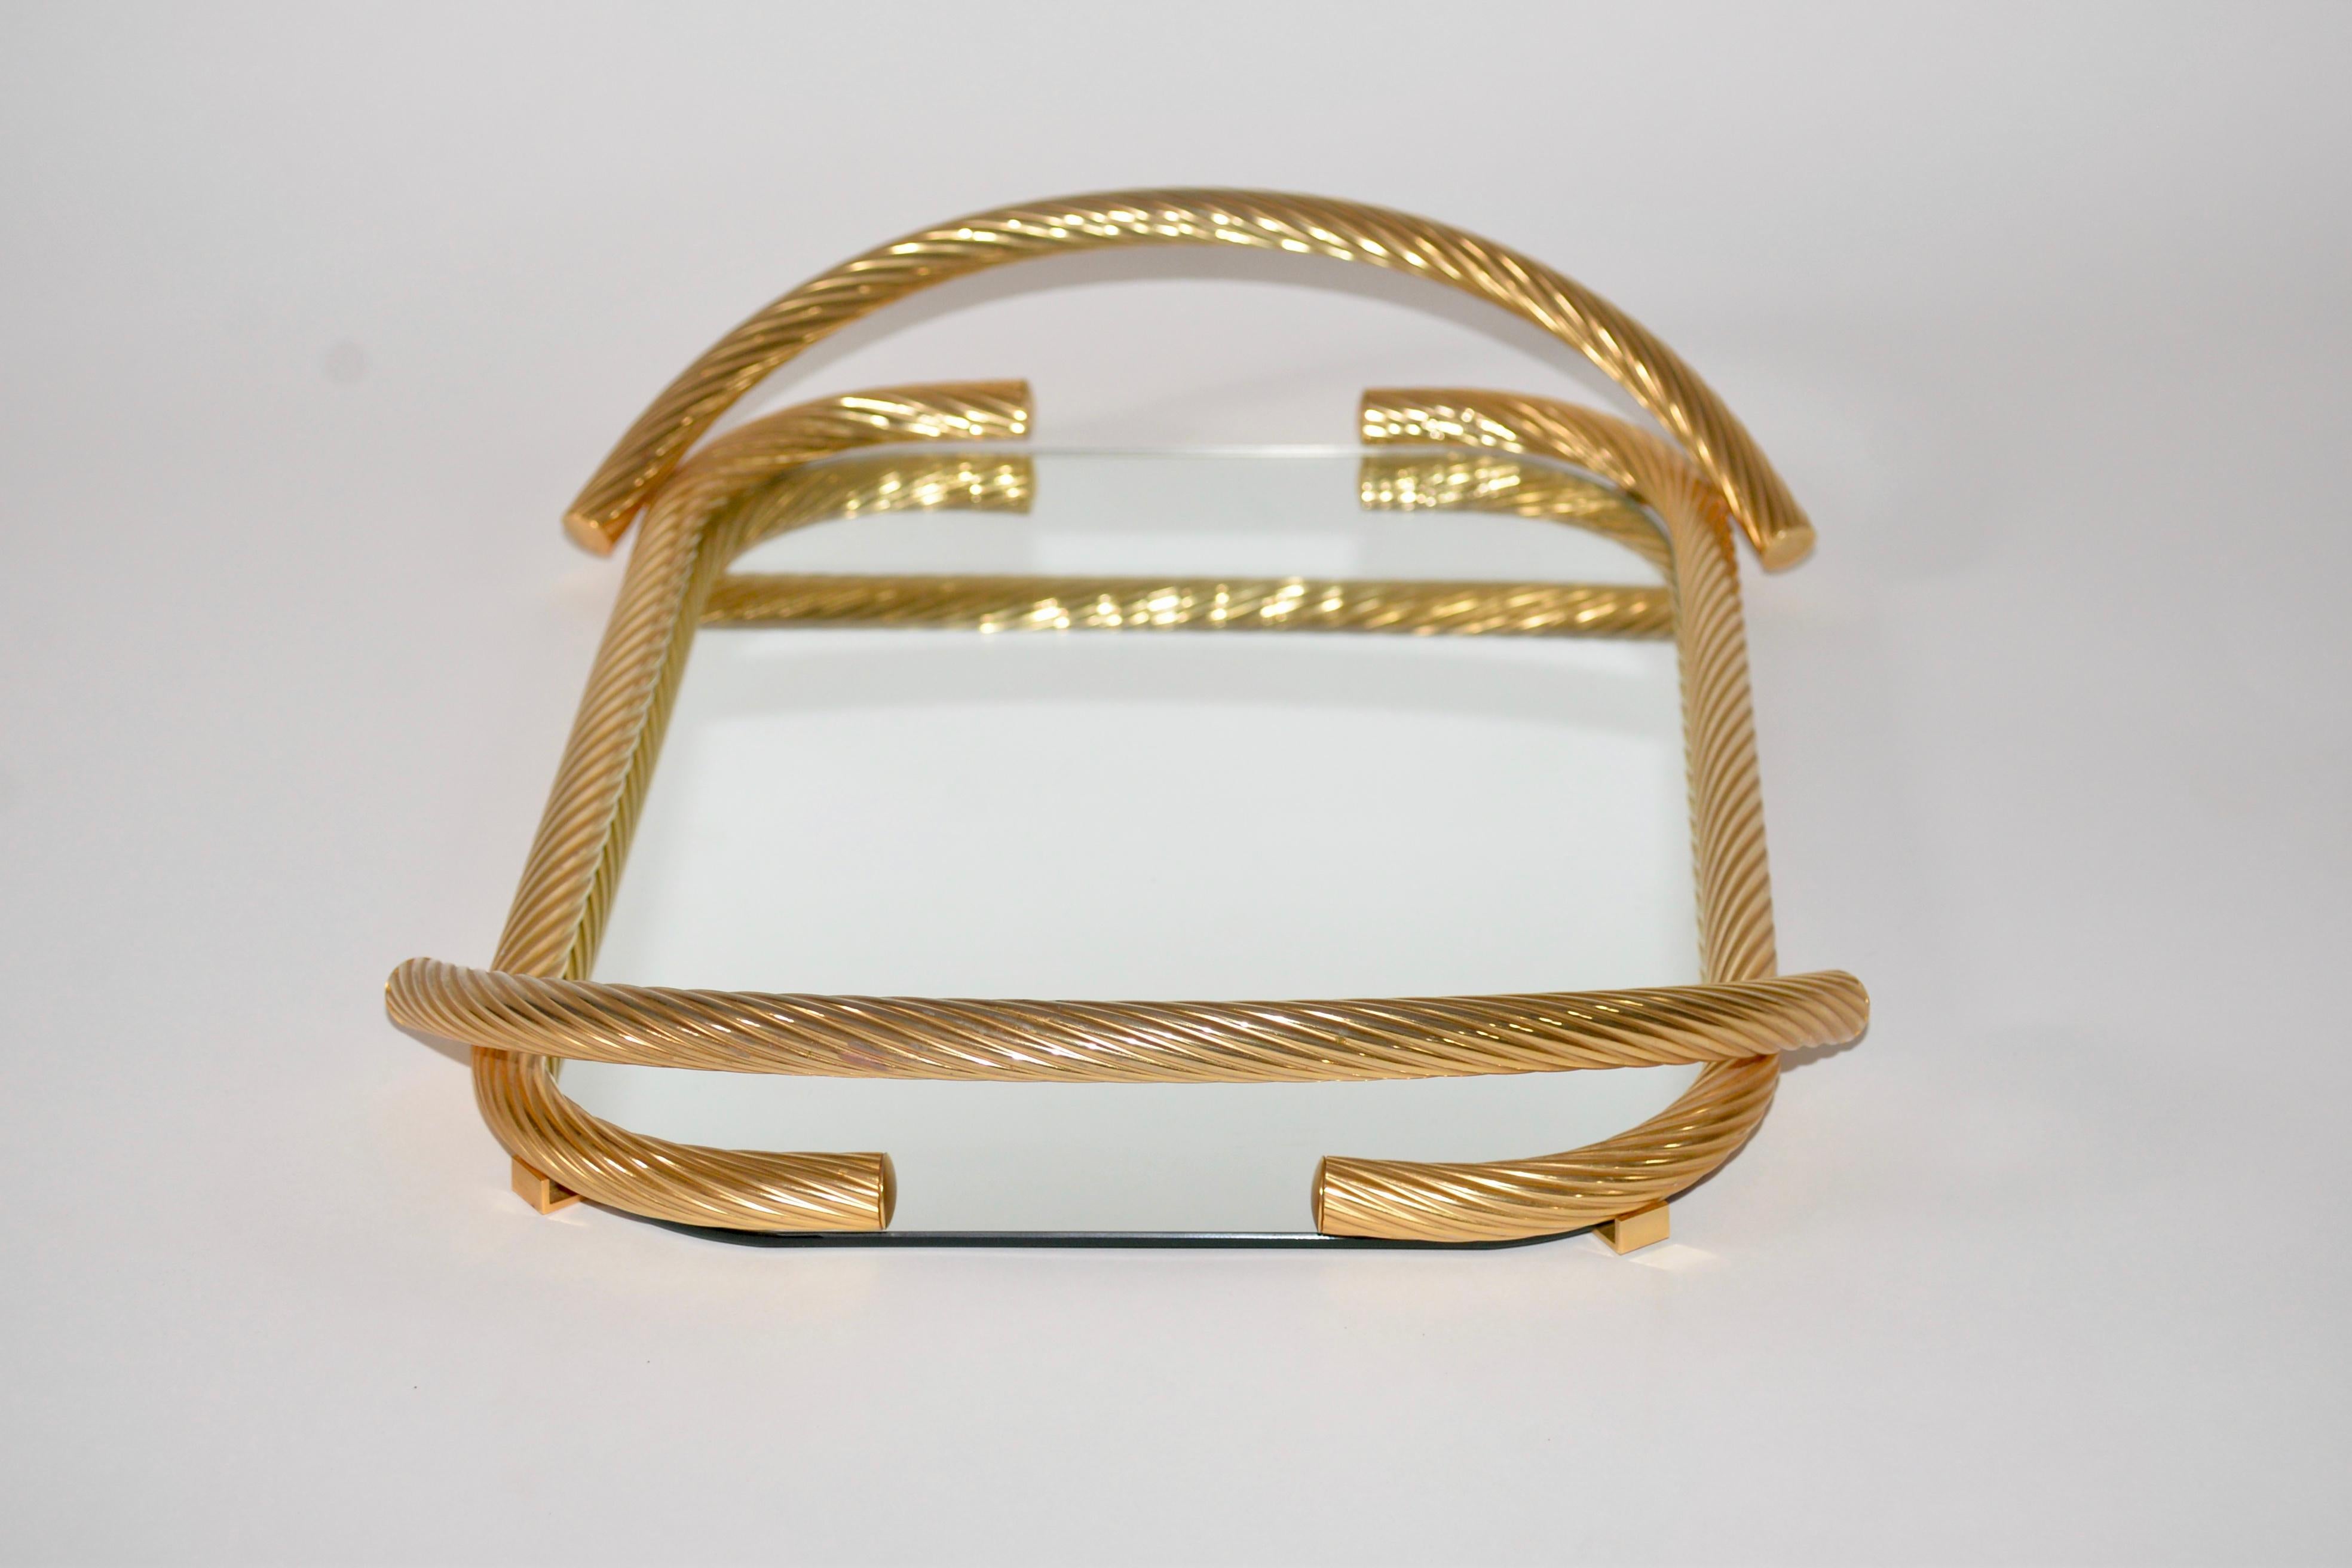 A fabulous 24-carat gold-plated vintage Italian serving tray in the Hollywood Regency style. A lovely rope twist effect detail on the brass work with a mirrored glass top.
 


 